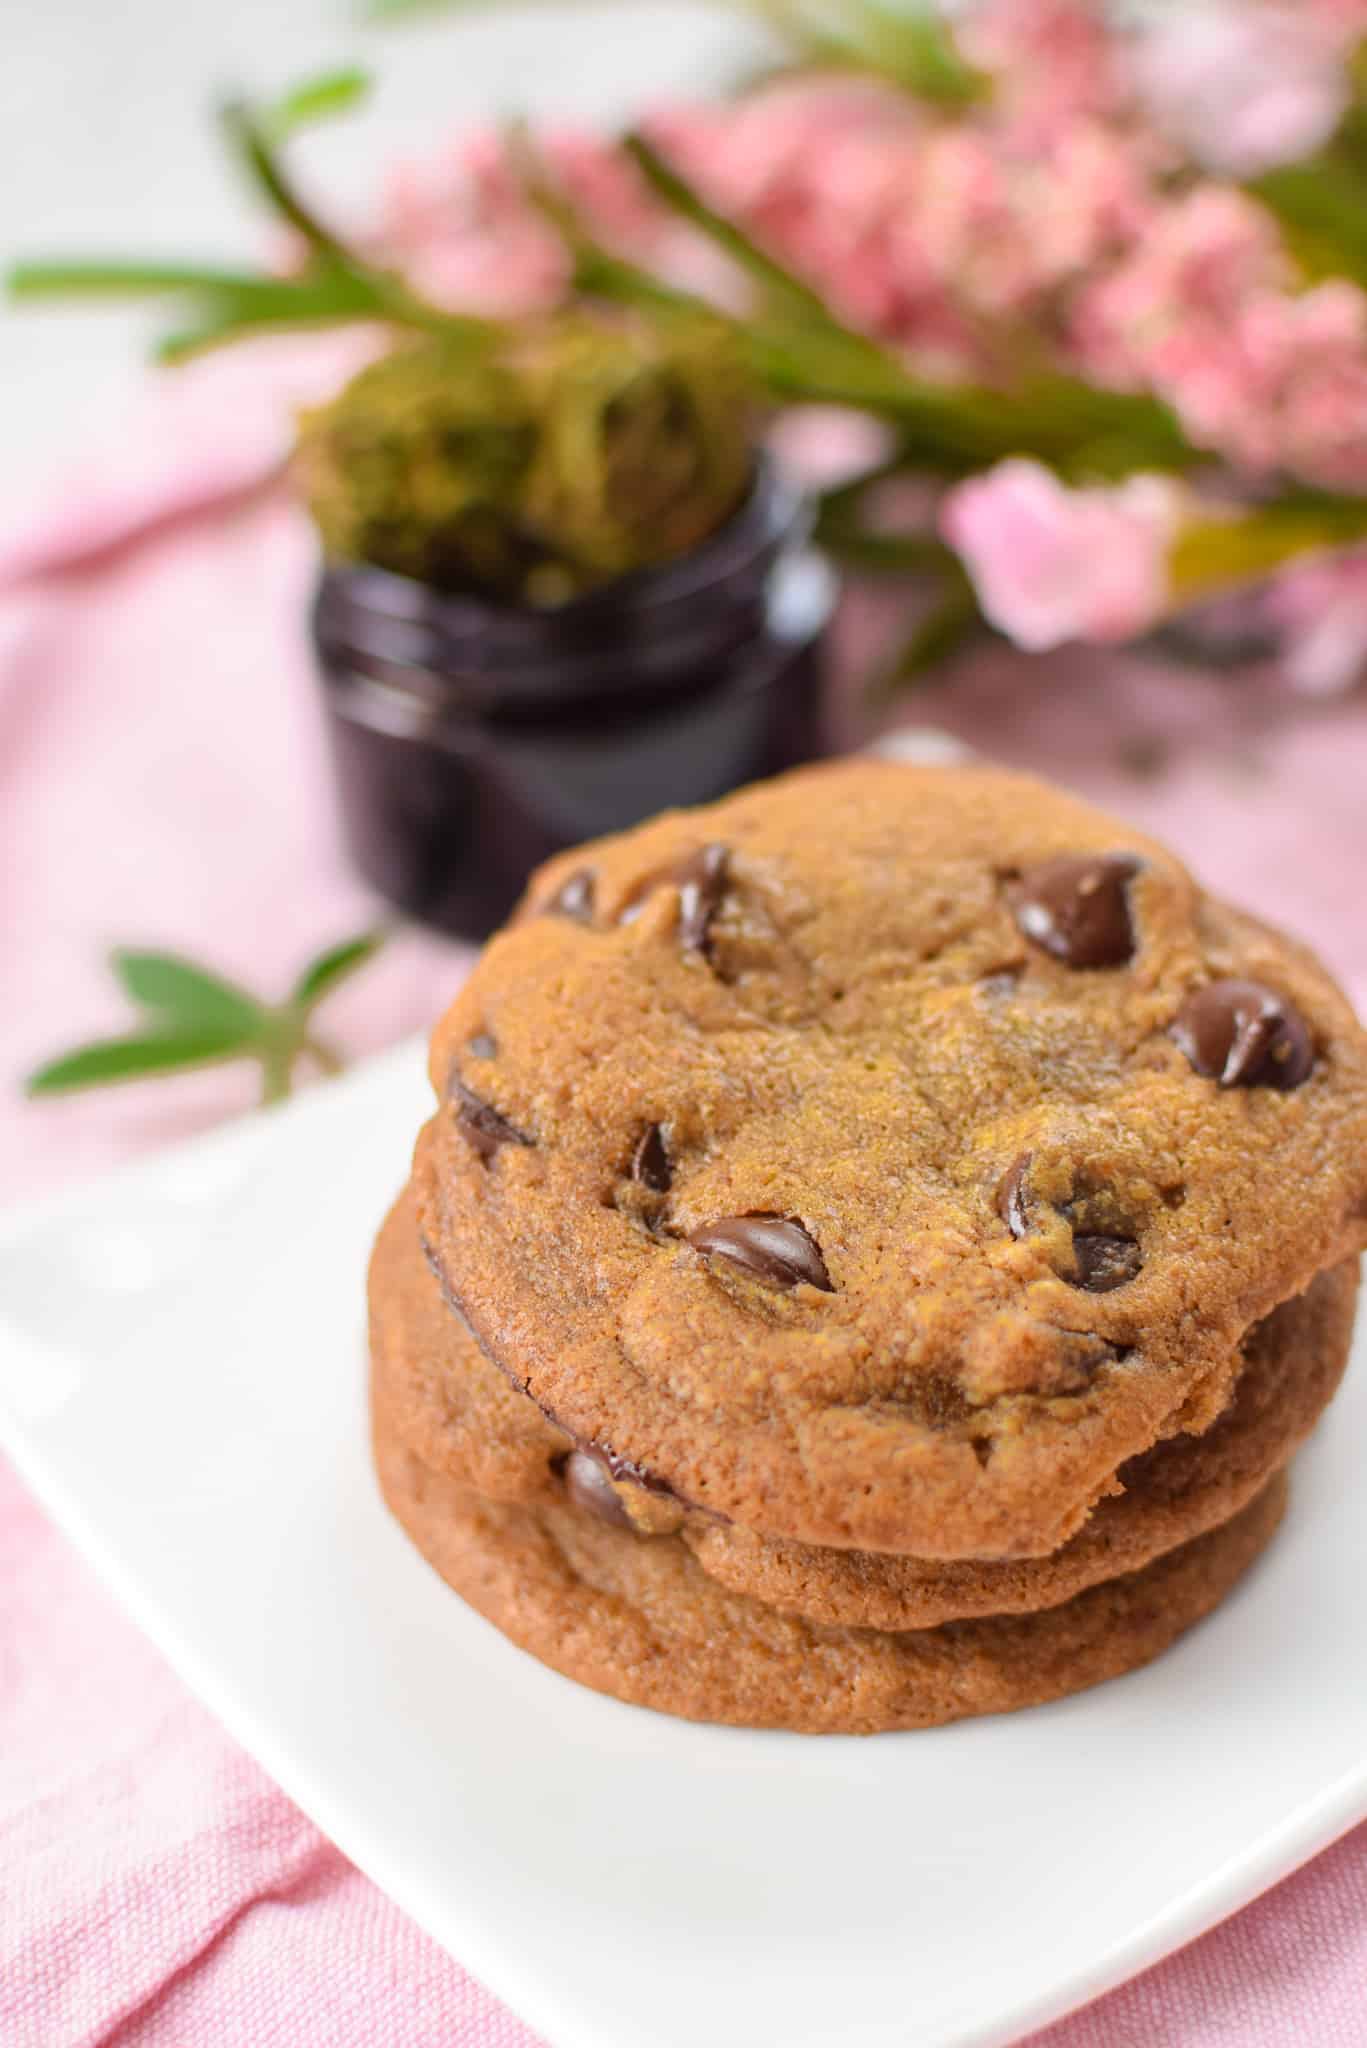 A picture of CBD chocolate chip cookies.